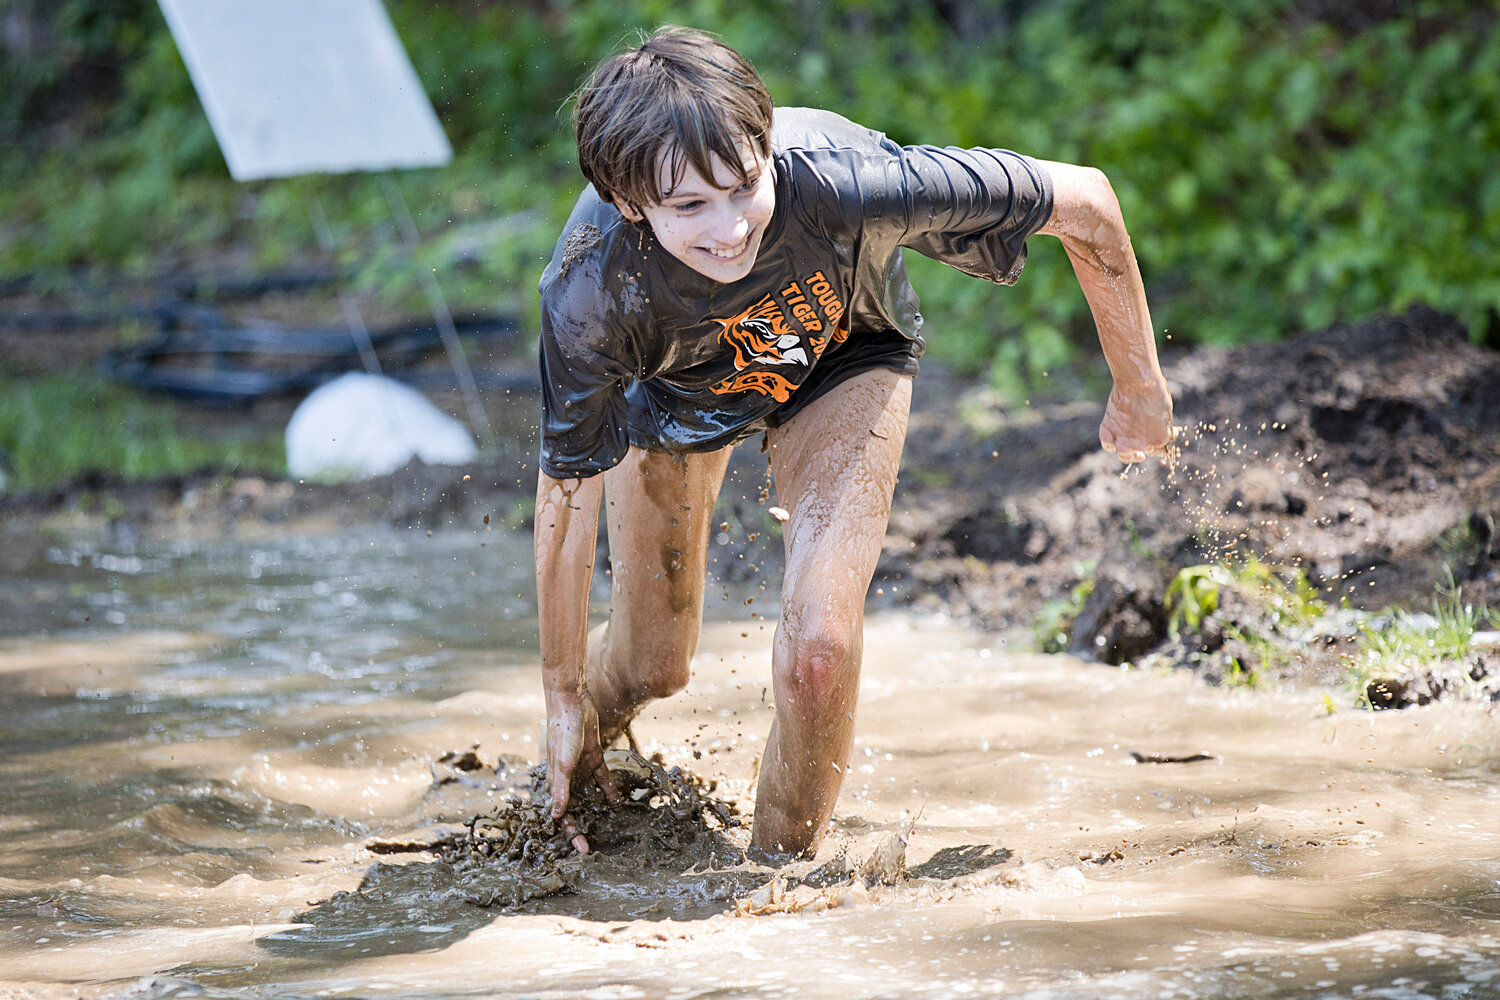 A competitor makes a splash while running through a mud obstacle.